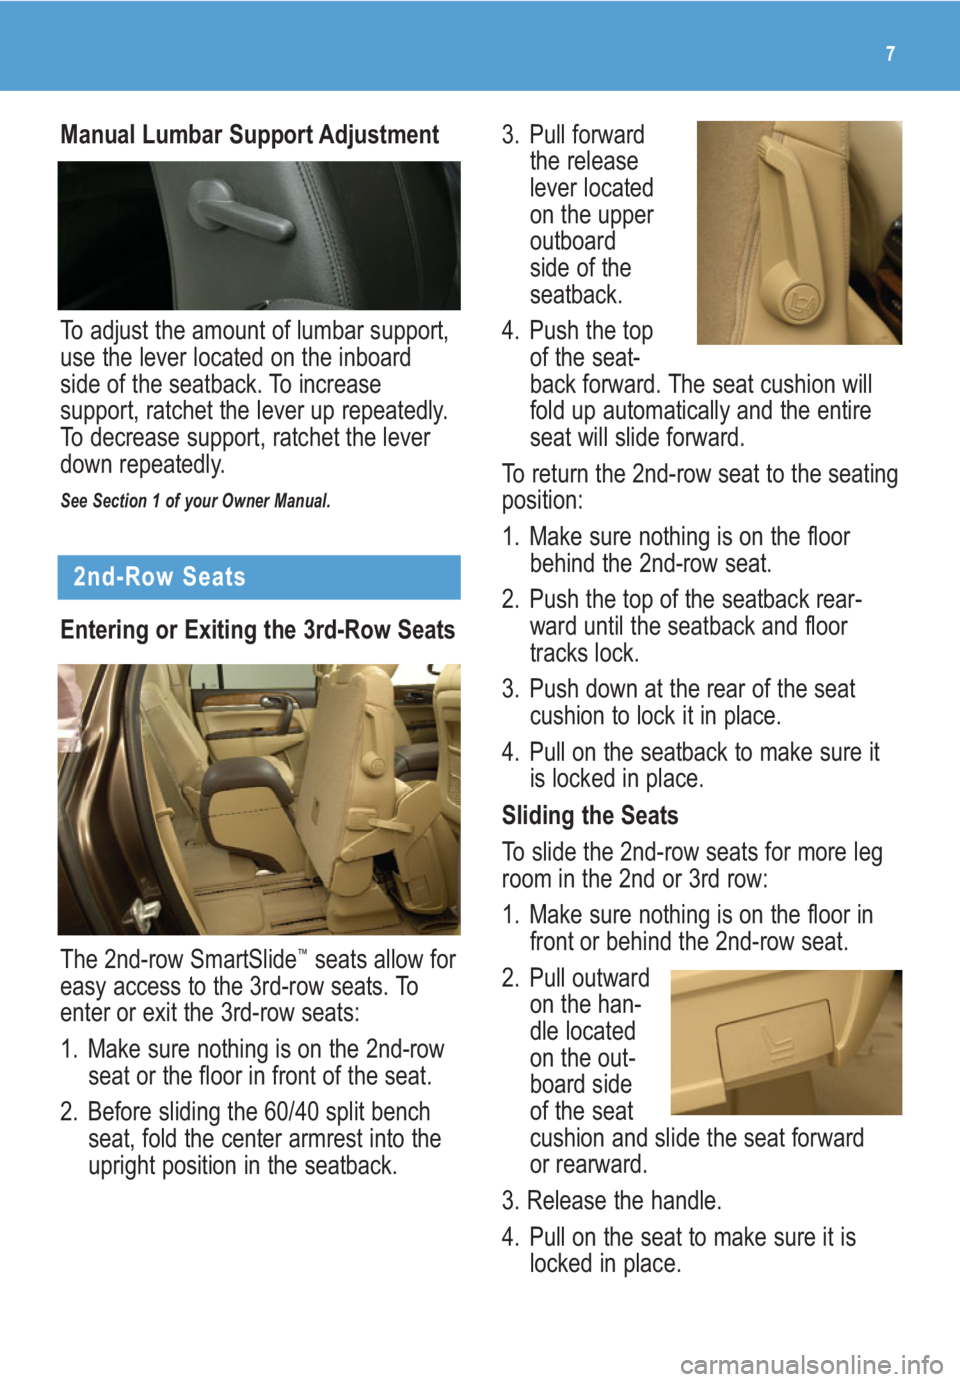 BUICK ENCLAVE 2009  Get To Know Guide Entering or Exiting the 3rd-Row Seats
The 2nd-row SmartSlide
™seats allow for
easy access to the 3rd-row seats. To
enter or exit the 3rd-row seats:
1. Make sure nothing is on the 2nd-row
seat or the